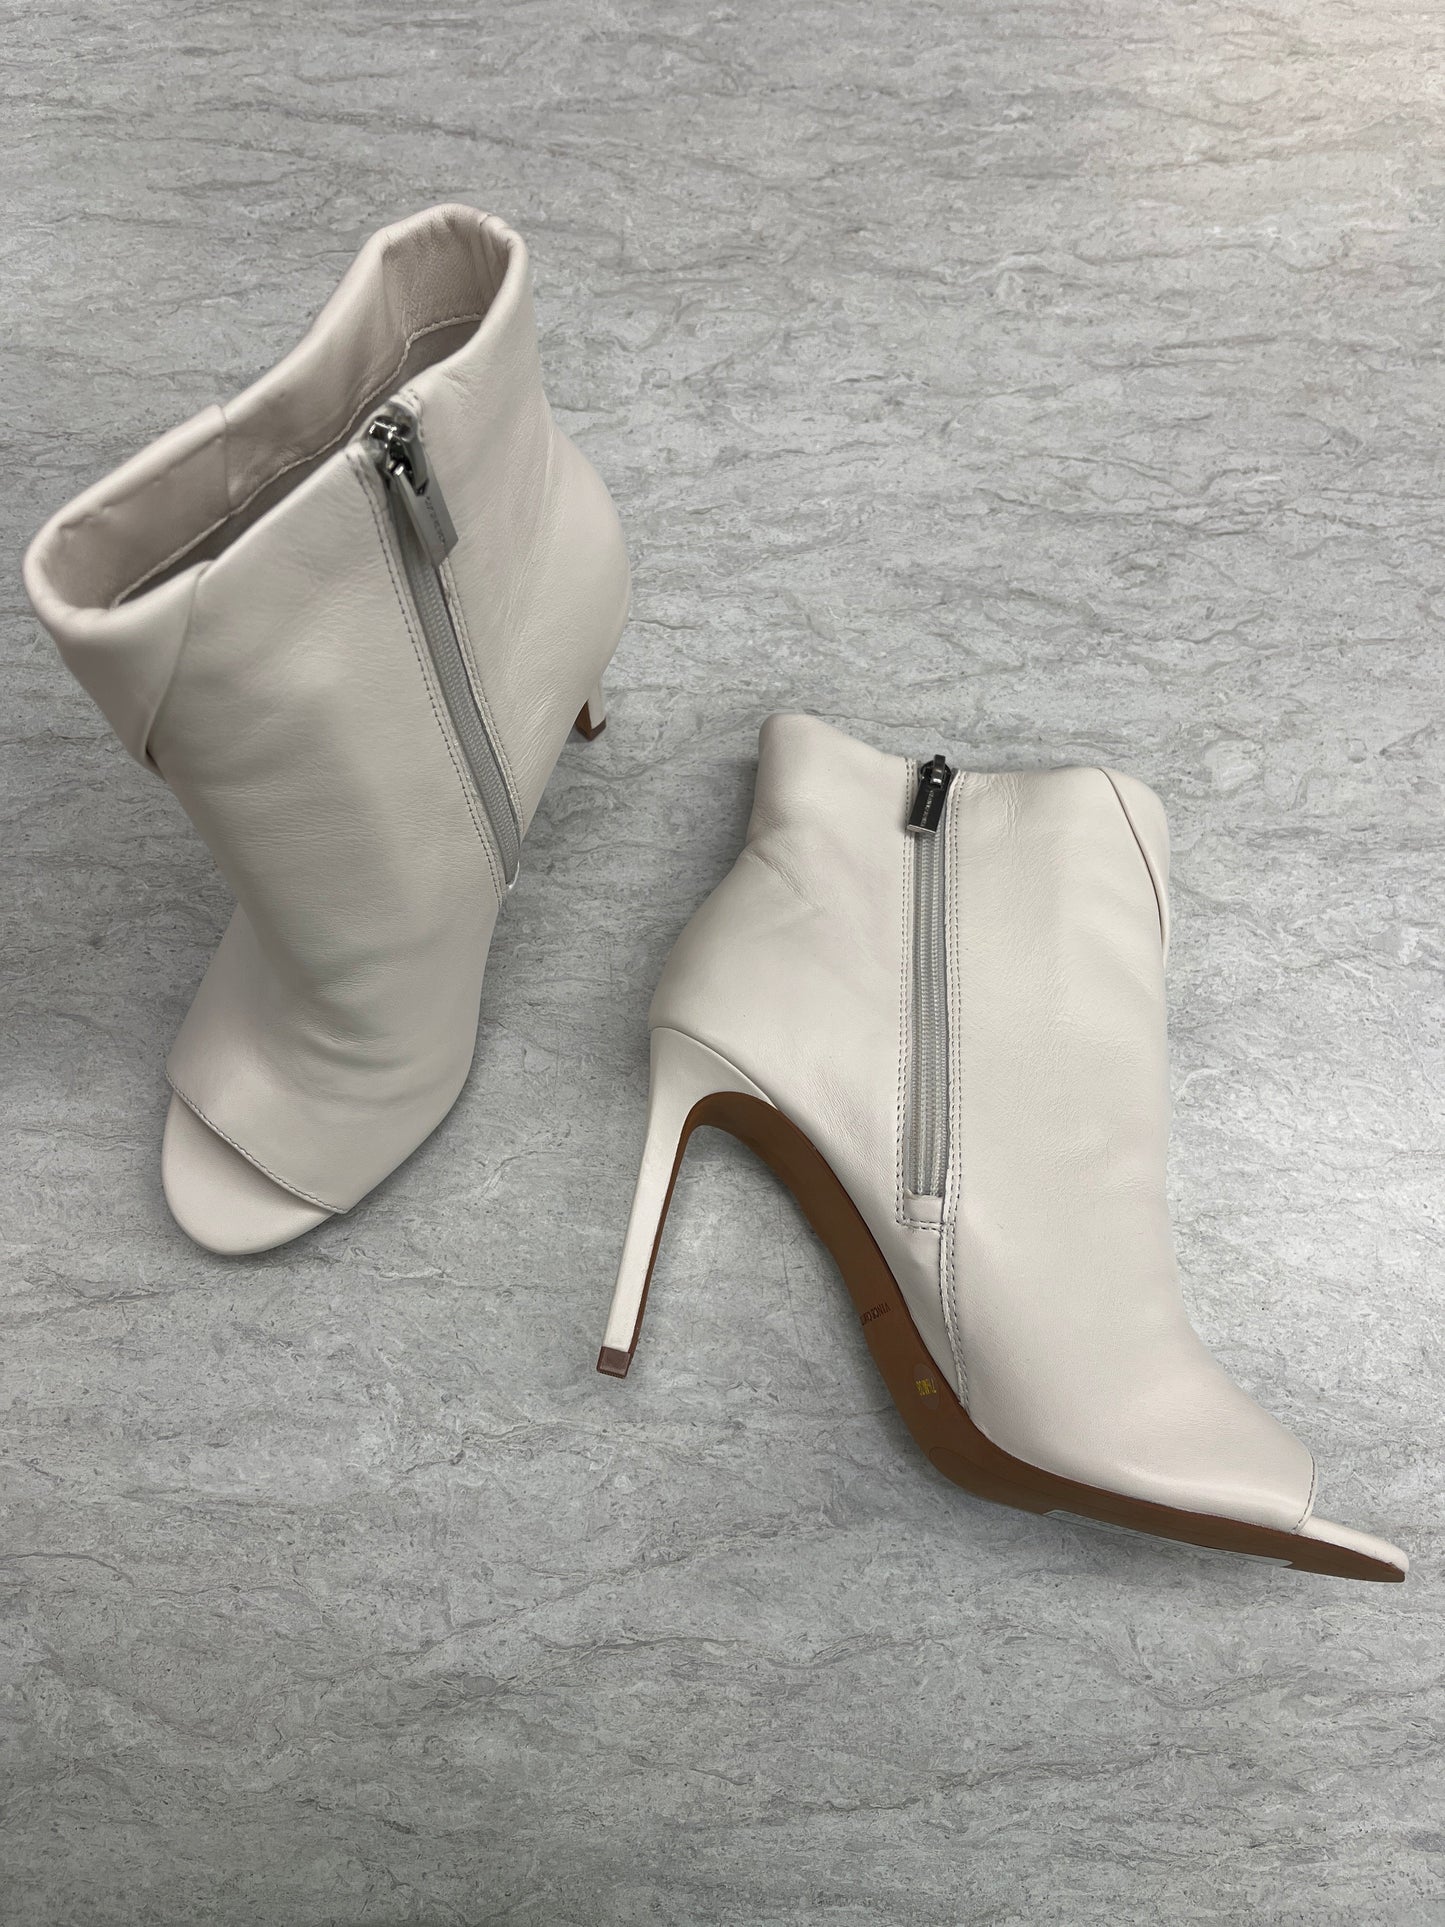 Cream Boots Ankle Heels Vince Camuto, Size 7.5